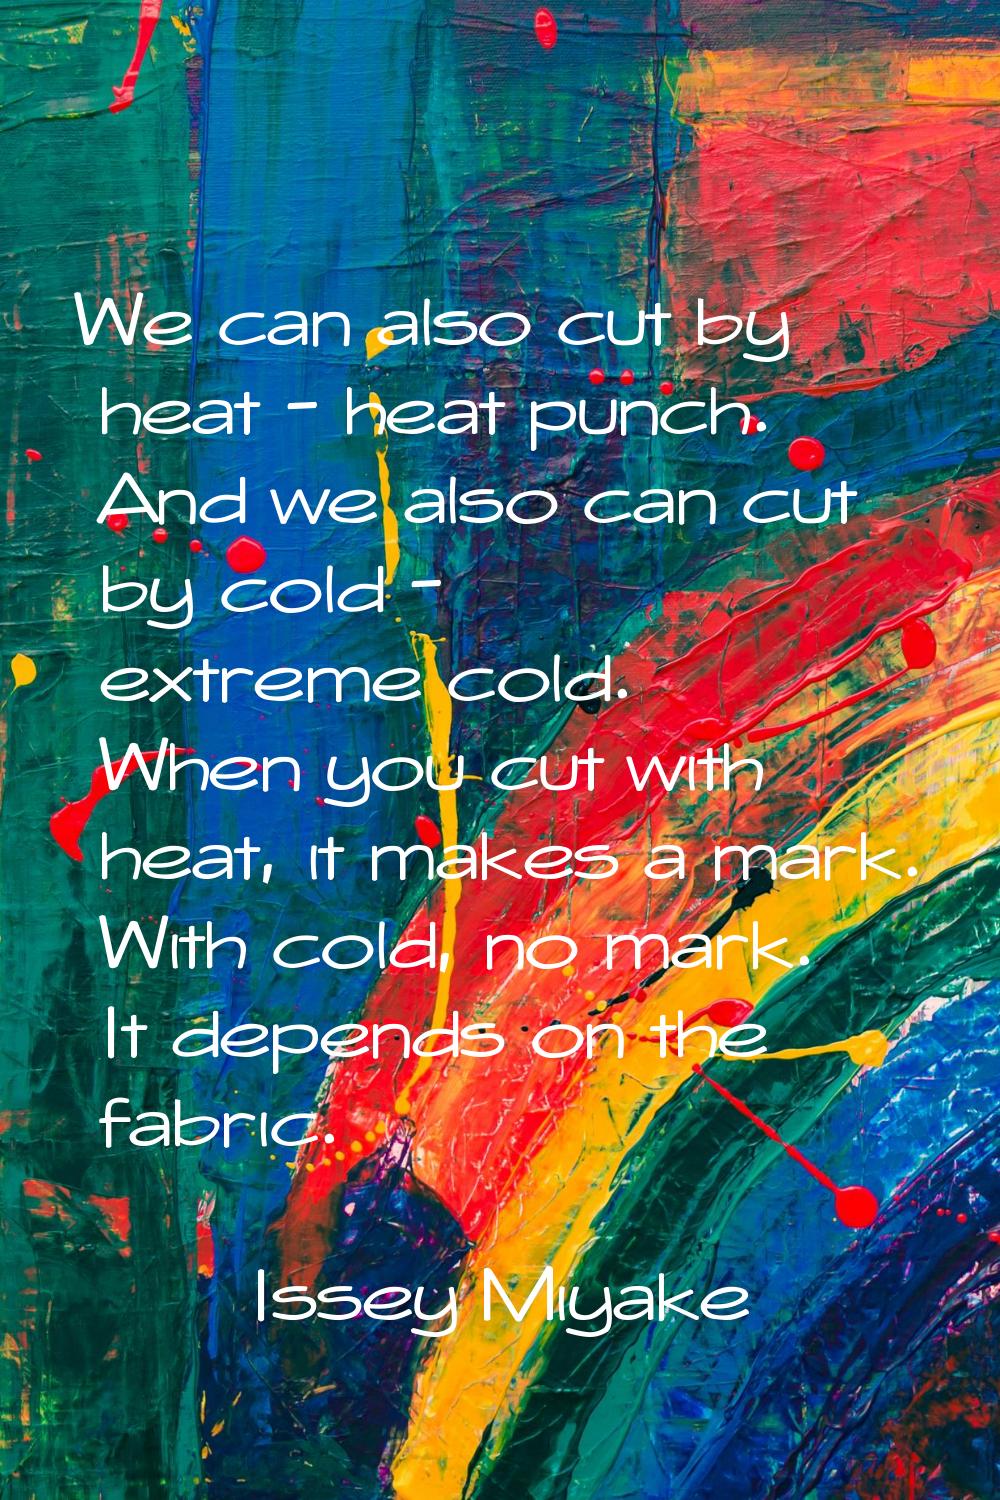 We can also cut by heat - heat punch. And we also can cut by cold - extreme cold. When you cut with